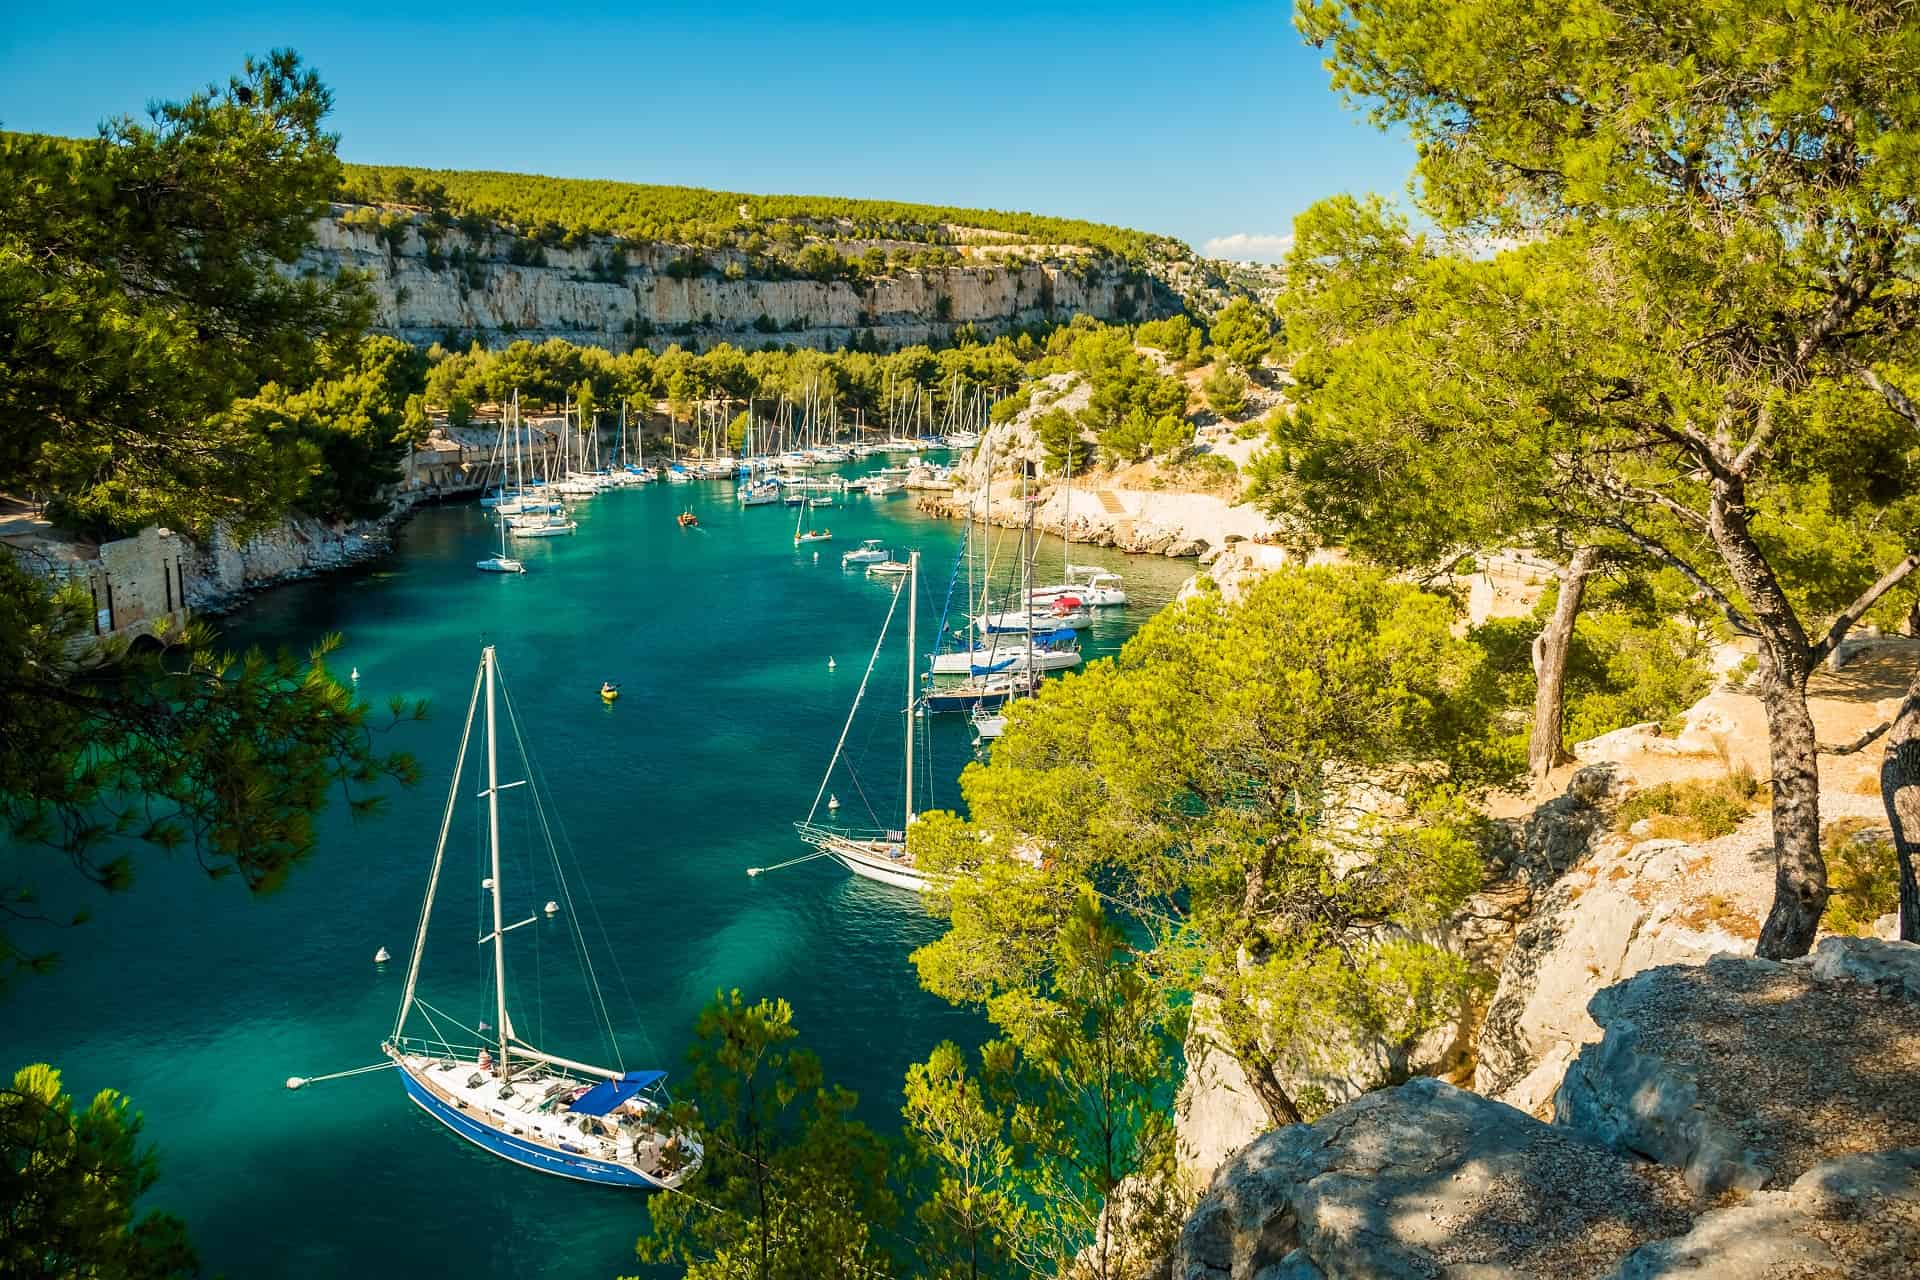 provence cassis